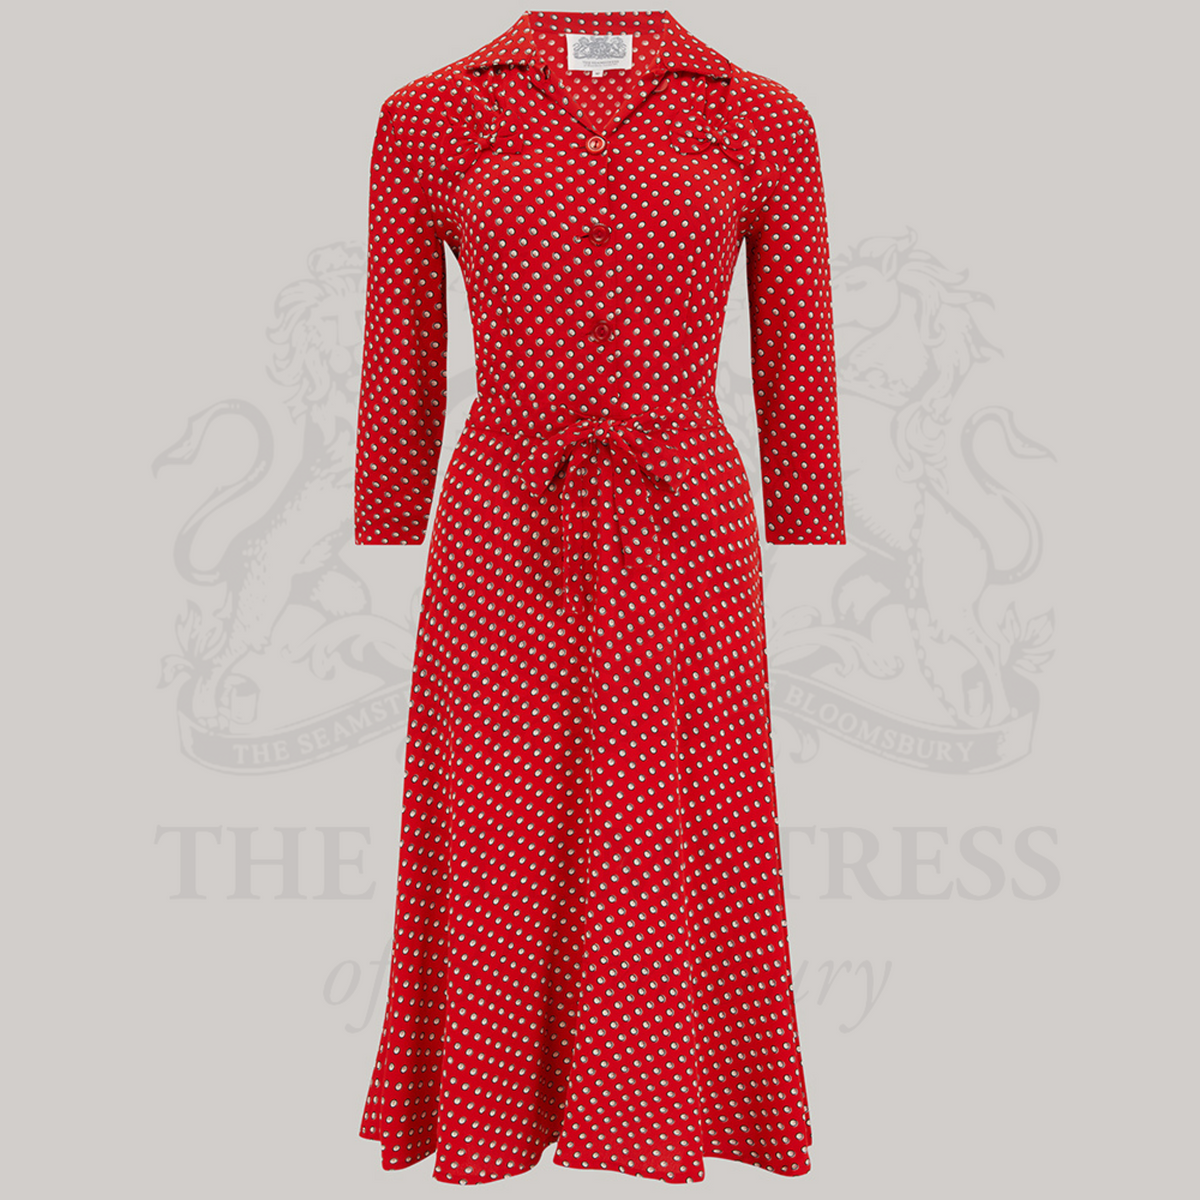 Polly CC41 Dress in Red Ditzy Dot